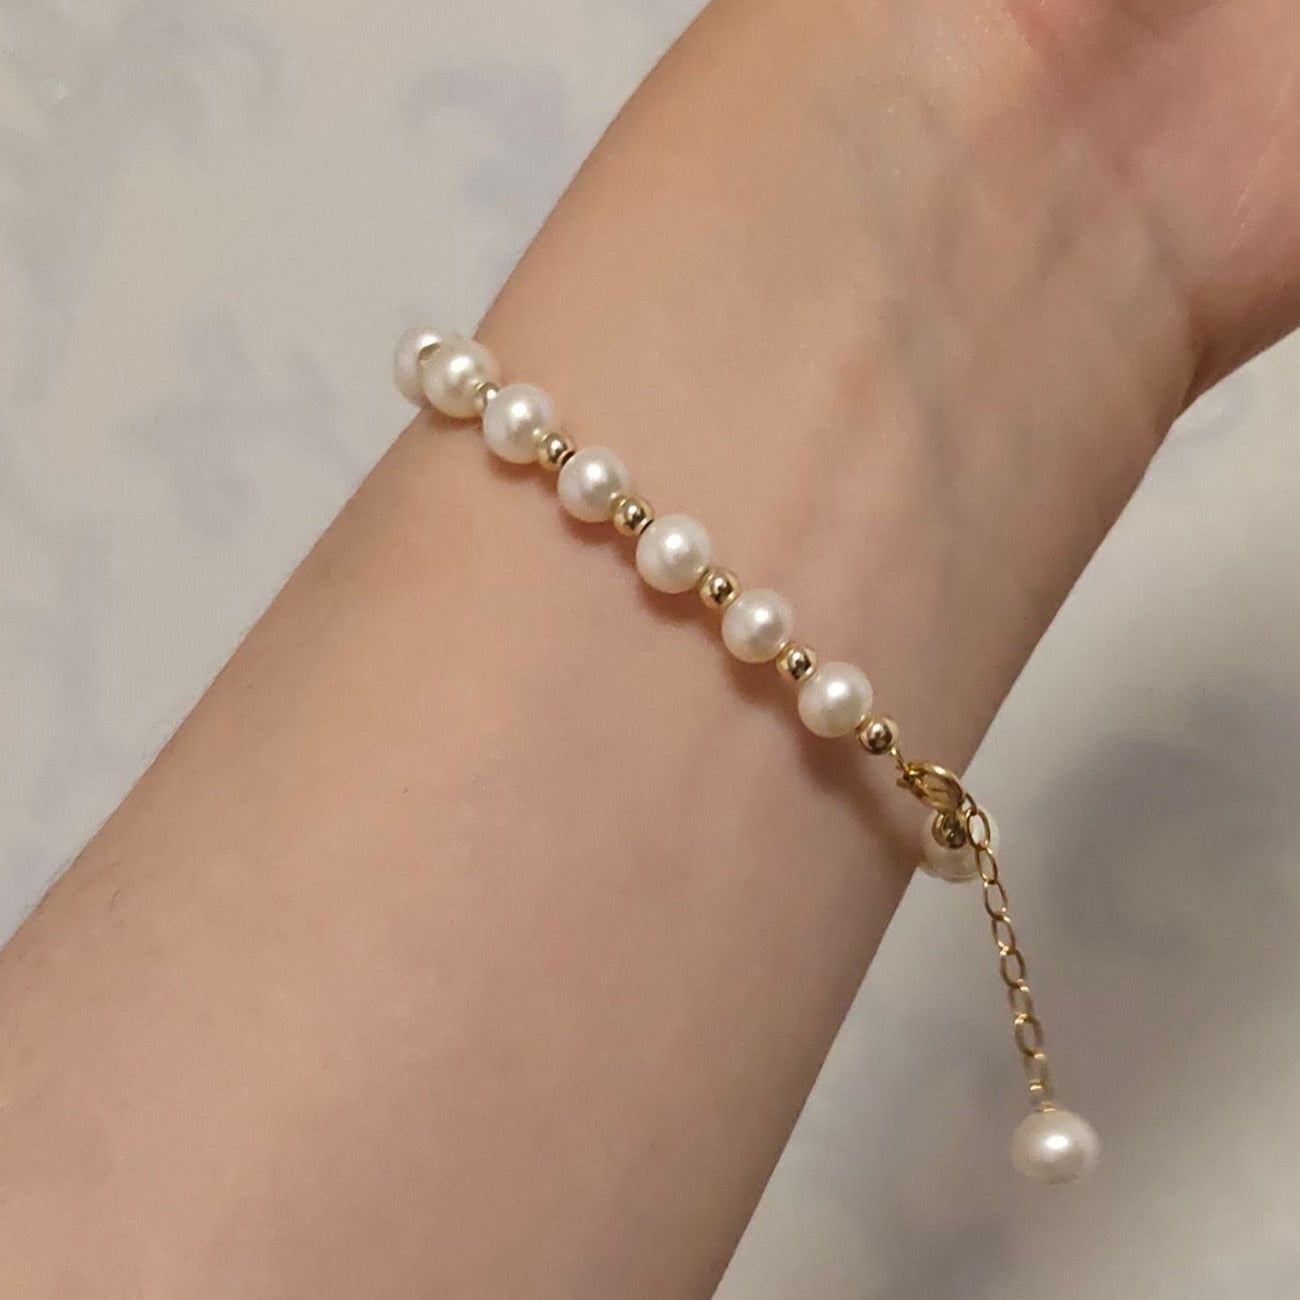 Exquisite Handmade Freshwater Pearl Beaded Bracelet - A Touch of Elegance for Every Occasion